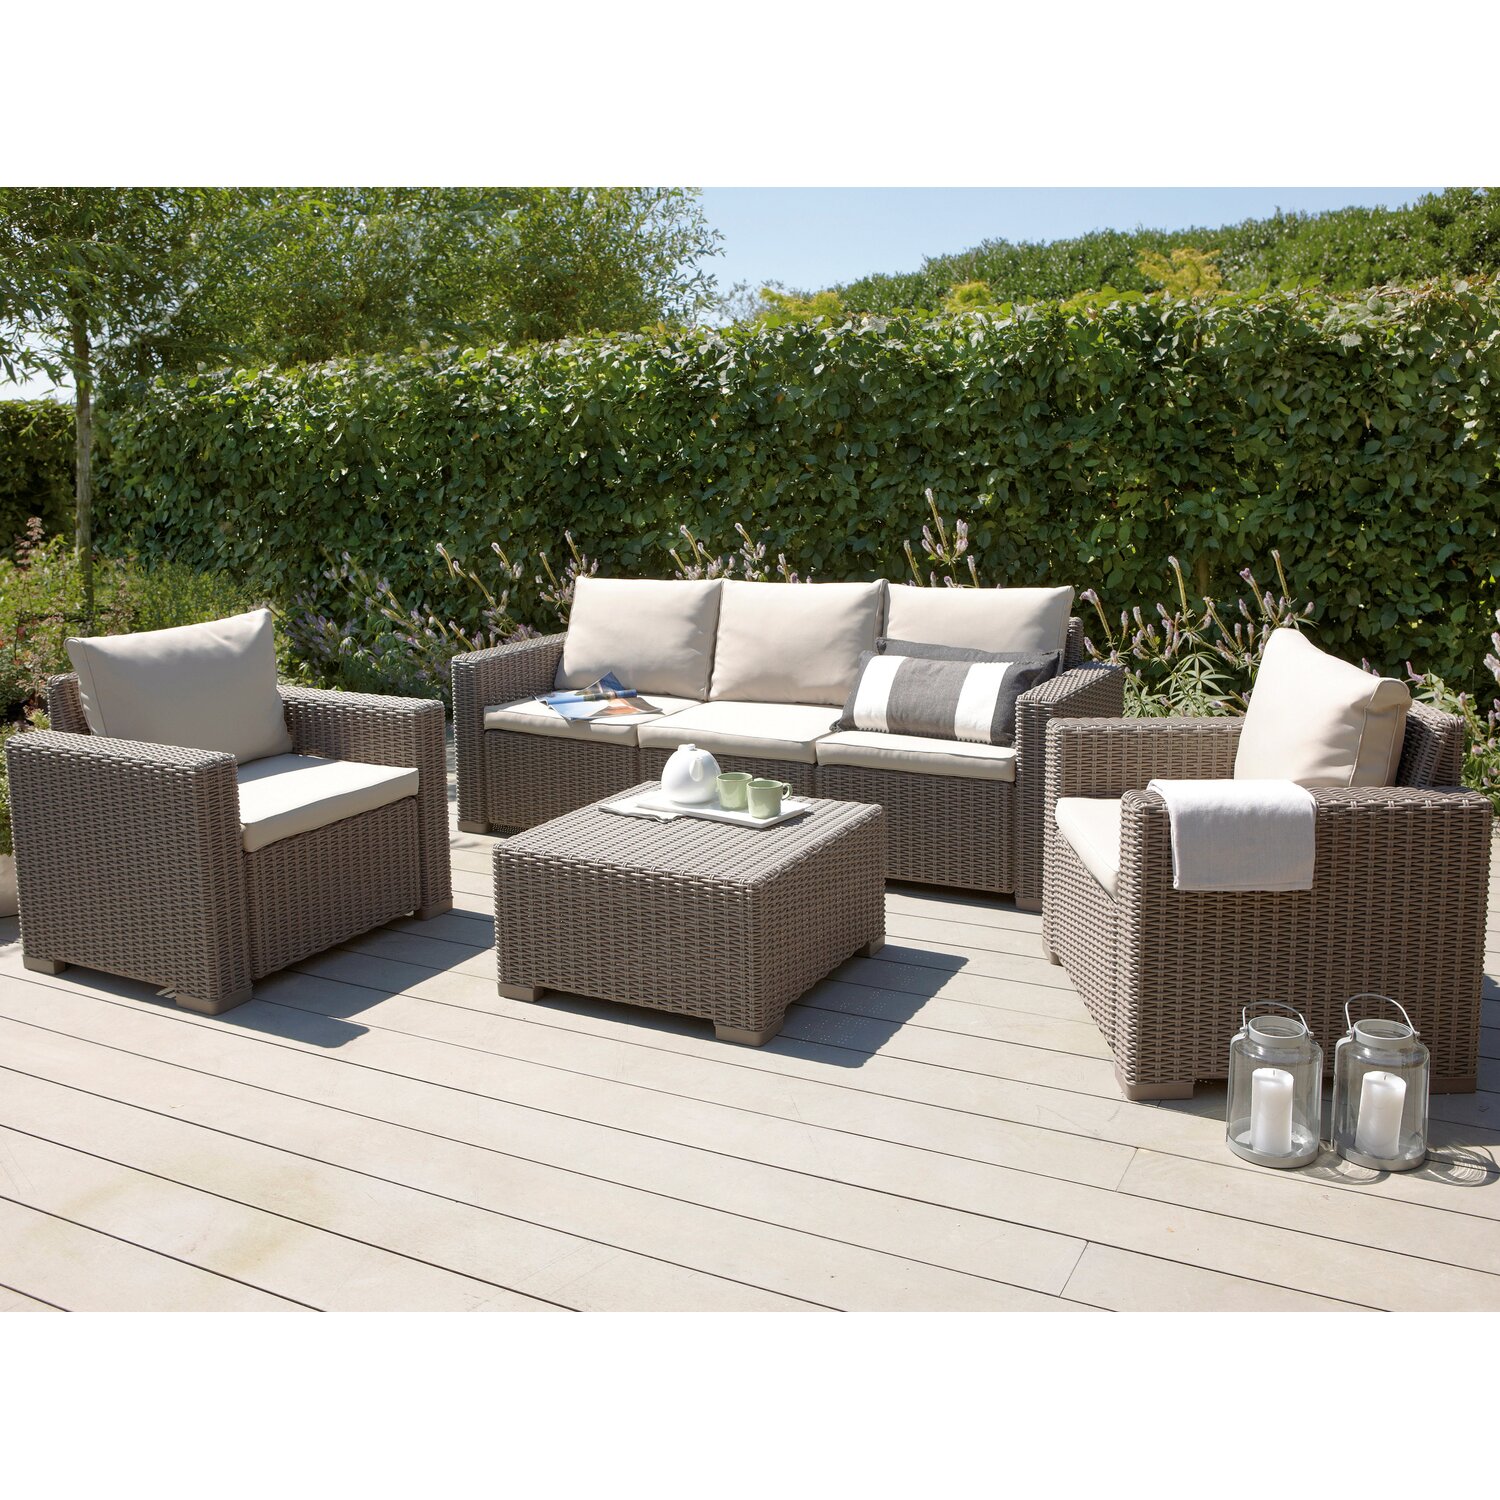 These Colour Of Garden Furniture Look The Best post thumbnail image